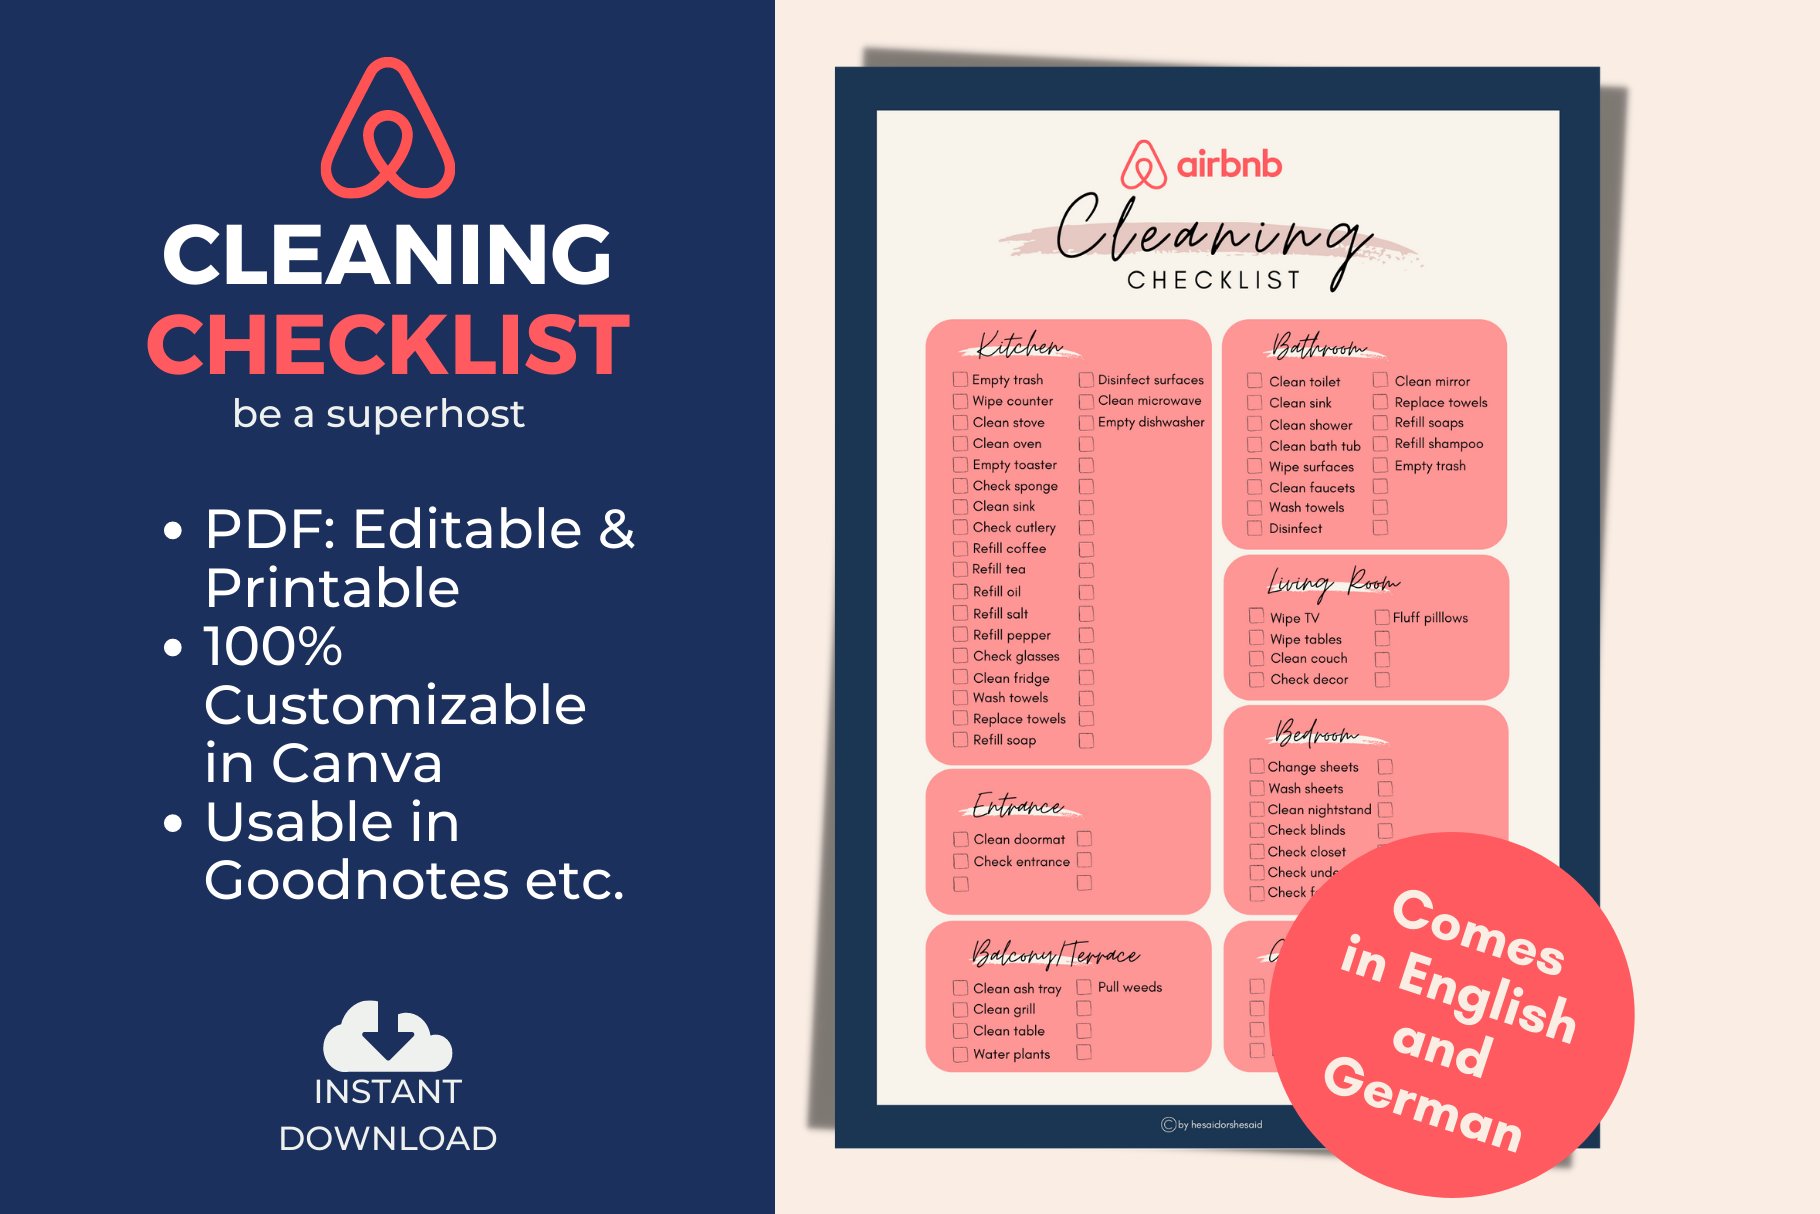 Airbnb Cleaning Checklist cover image.